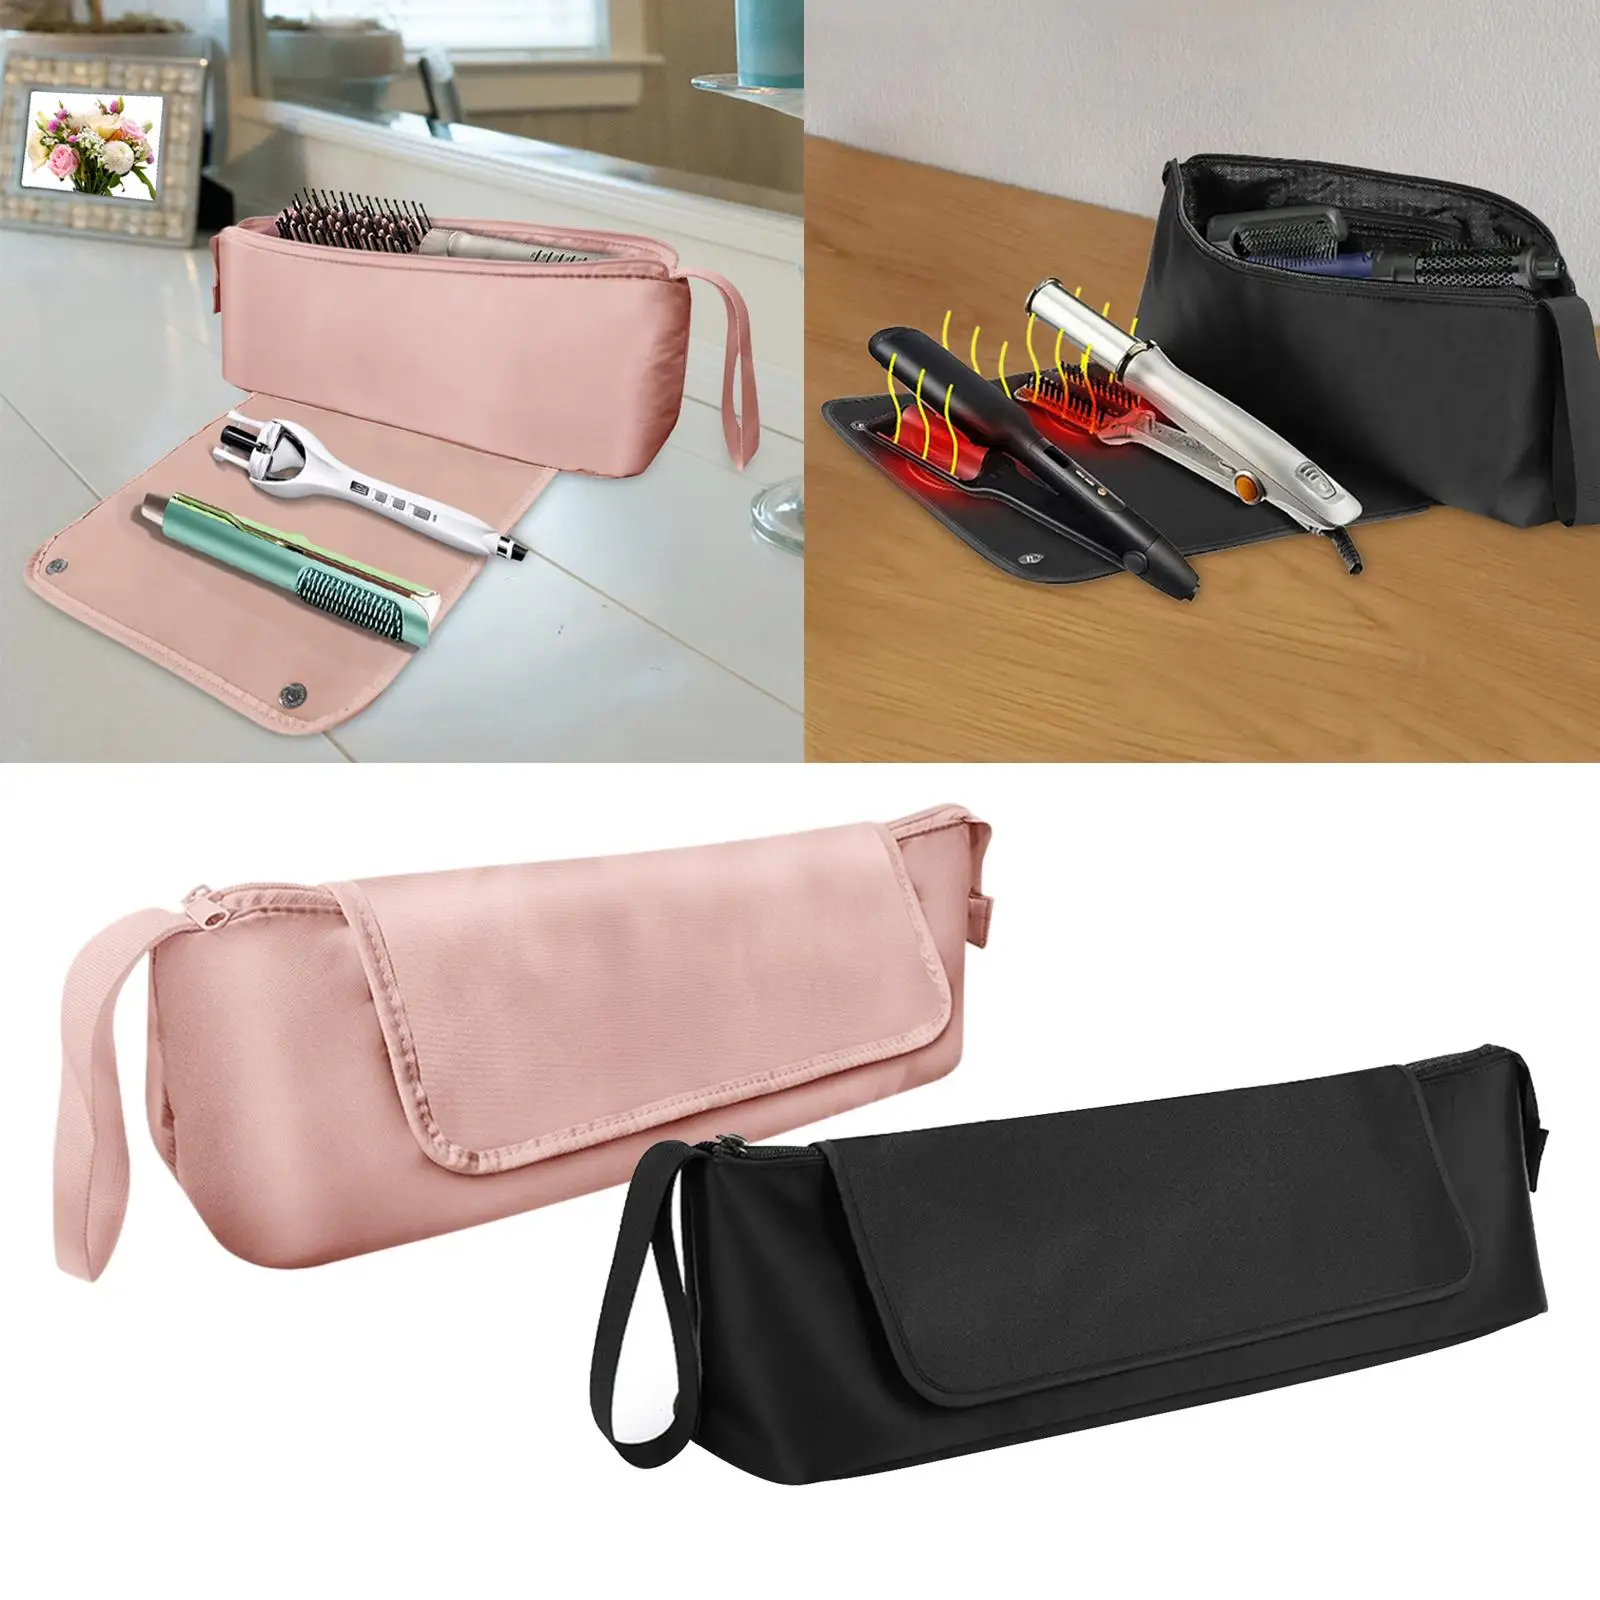 Hair Styling Accessory Organizer Hair Tools Travel Bag and Heat Resistant Mat for Styling Irons Flat Iron Haircare Accessories